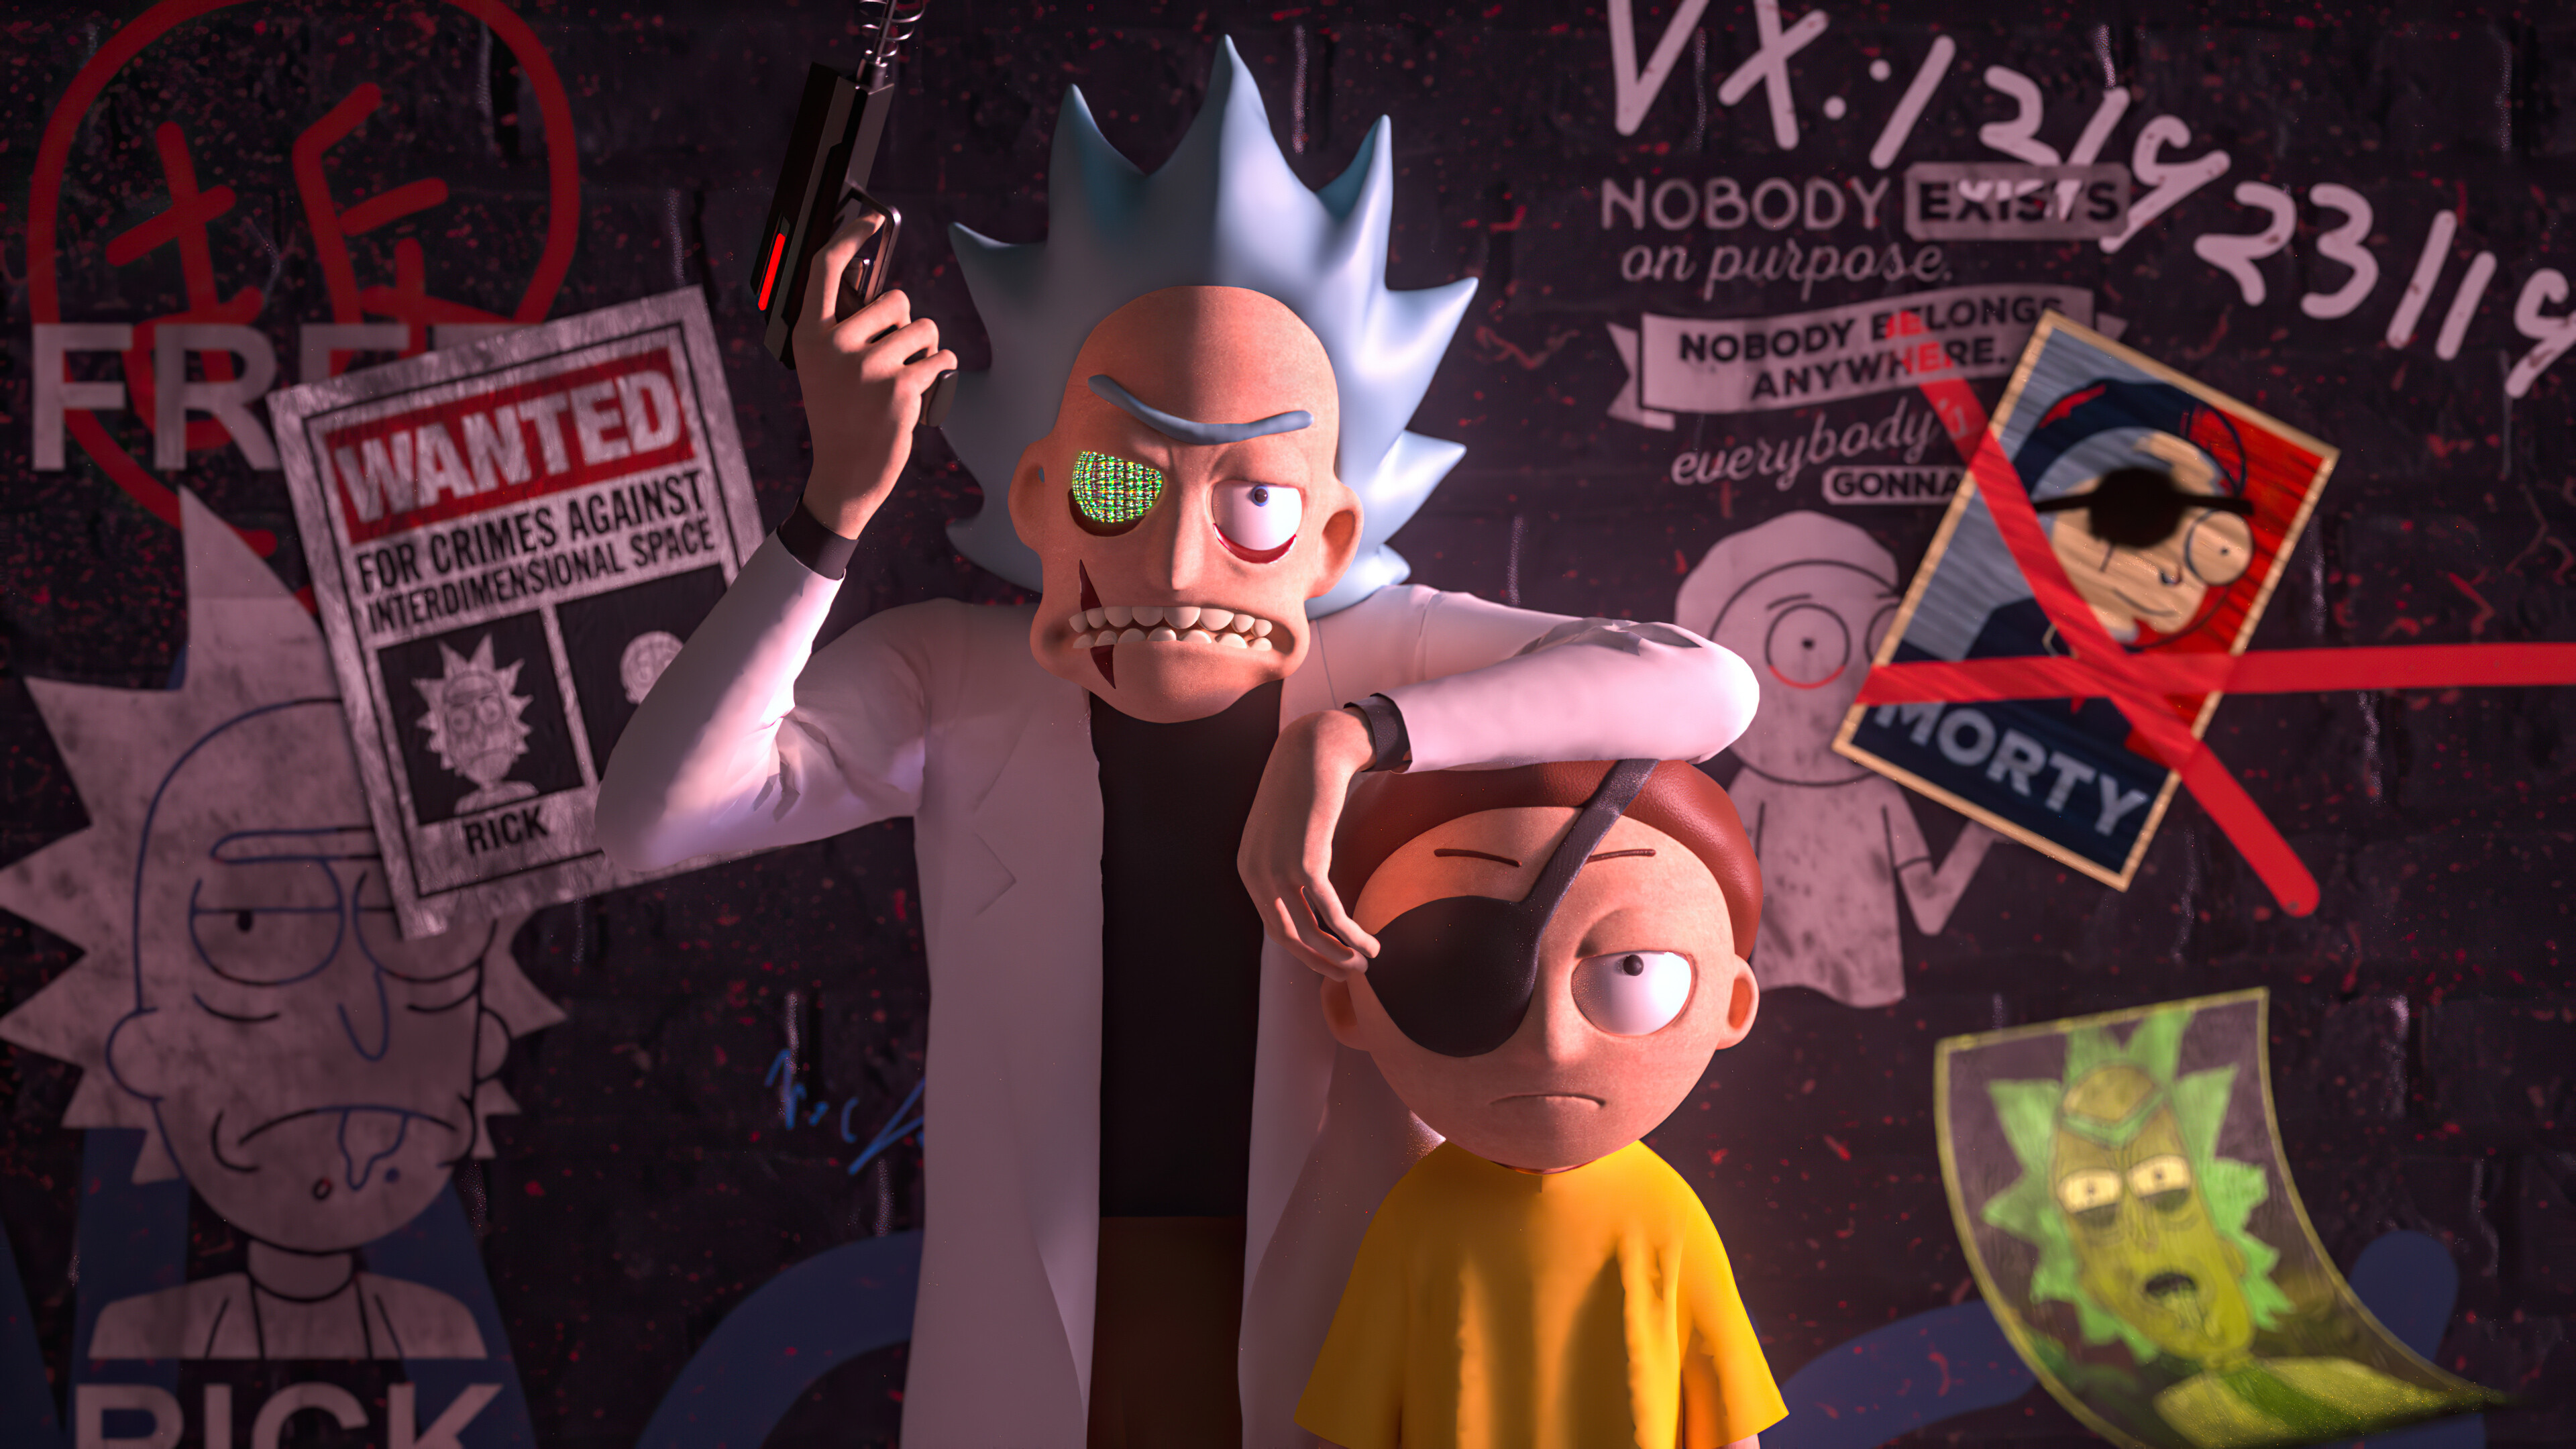 Rick and Morty: An alcoholic grandfather dragging his grandson into hijinks. 3840x2160 4K Wallpaper.